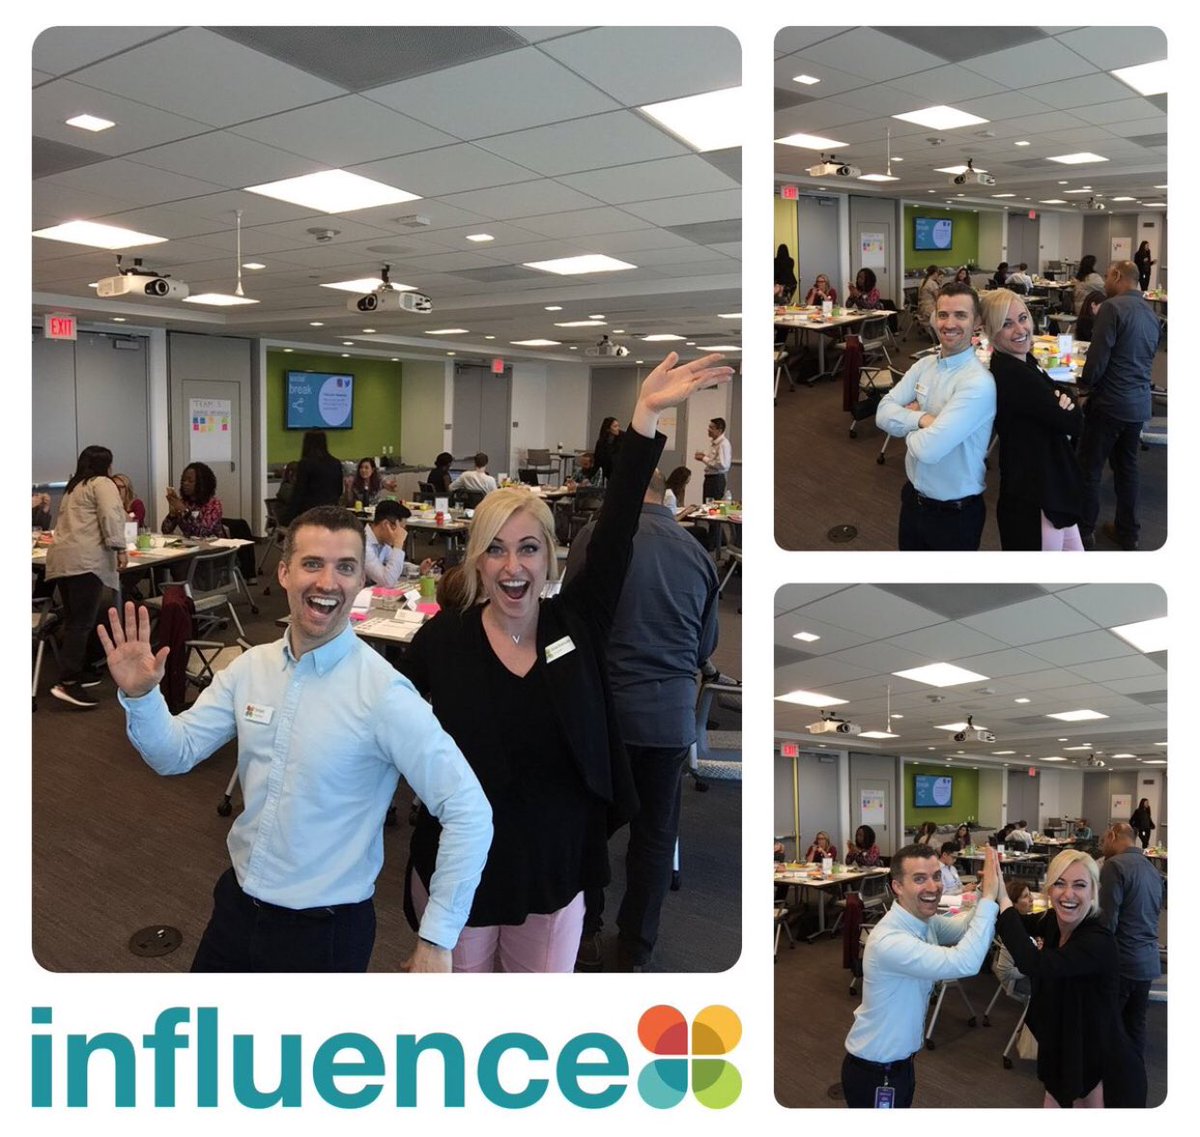 Hardcore INFLUENCE work happening over here today! Photobooth and all! Working with an AMAZING group of professionals this week! Shout out to the best Talent in the biz @bmaslow 👩🏼‍🏫👨🏼‍🏫 @talentlabnbcu #influenceNBCU